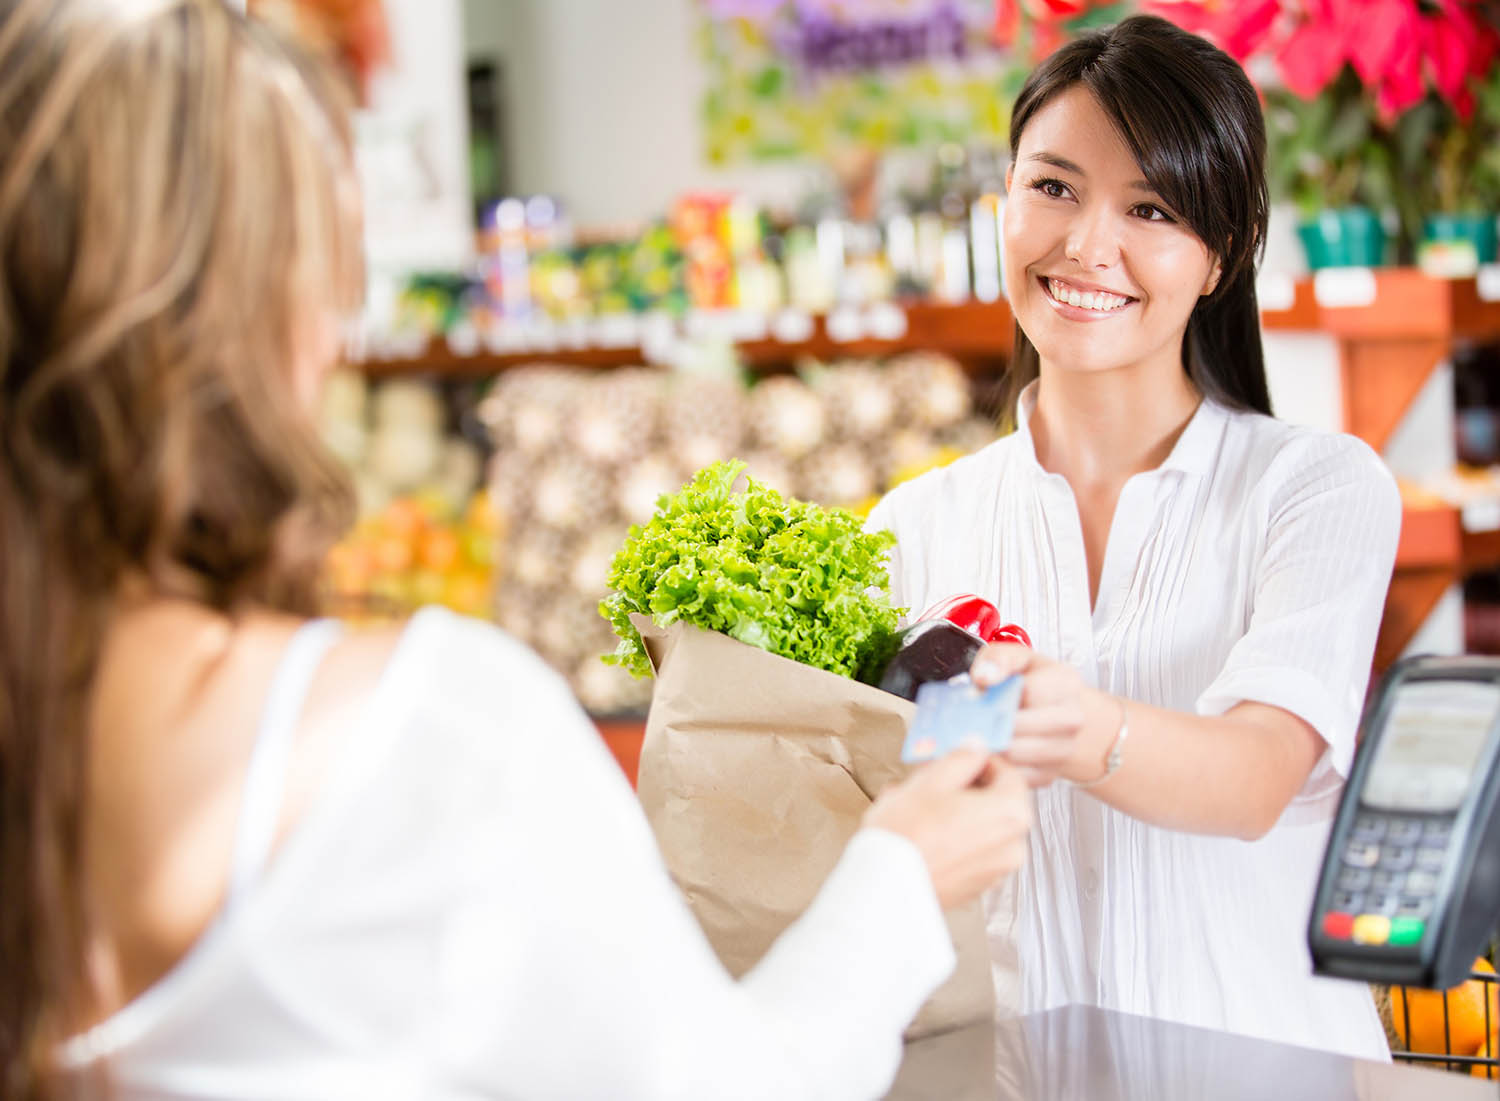 image of woman shopping for groceries paying with credit card